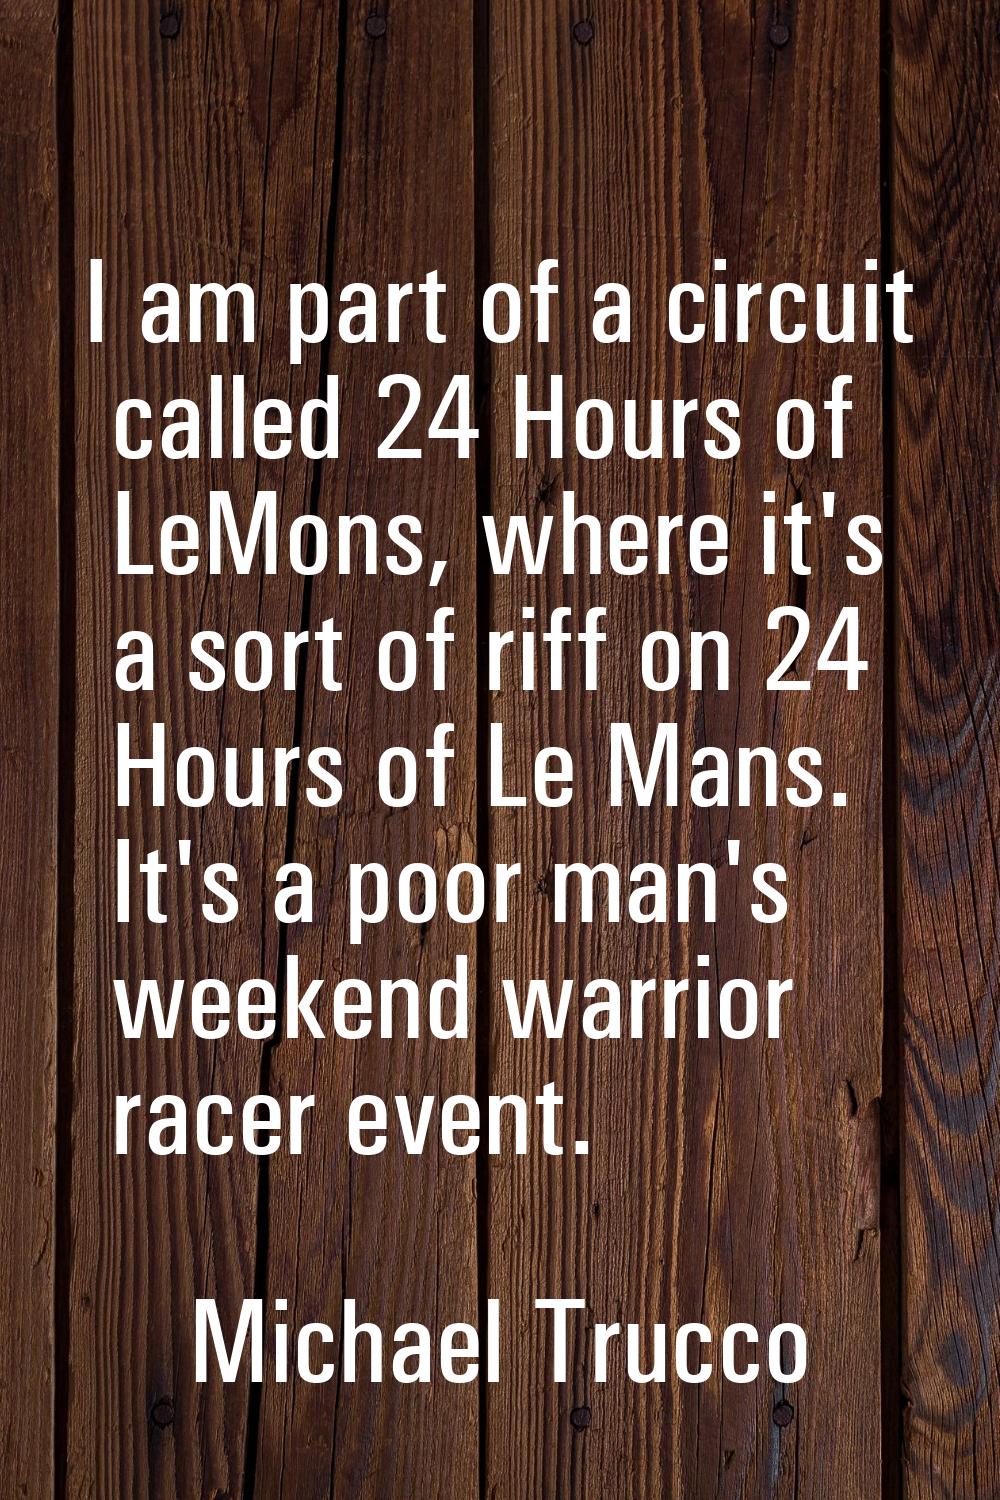 I am part of a circuit called 24 Hours of LeMons, where it's a sort of riff on 24 Hours of Le Mans.